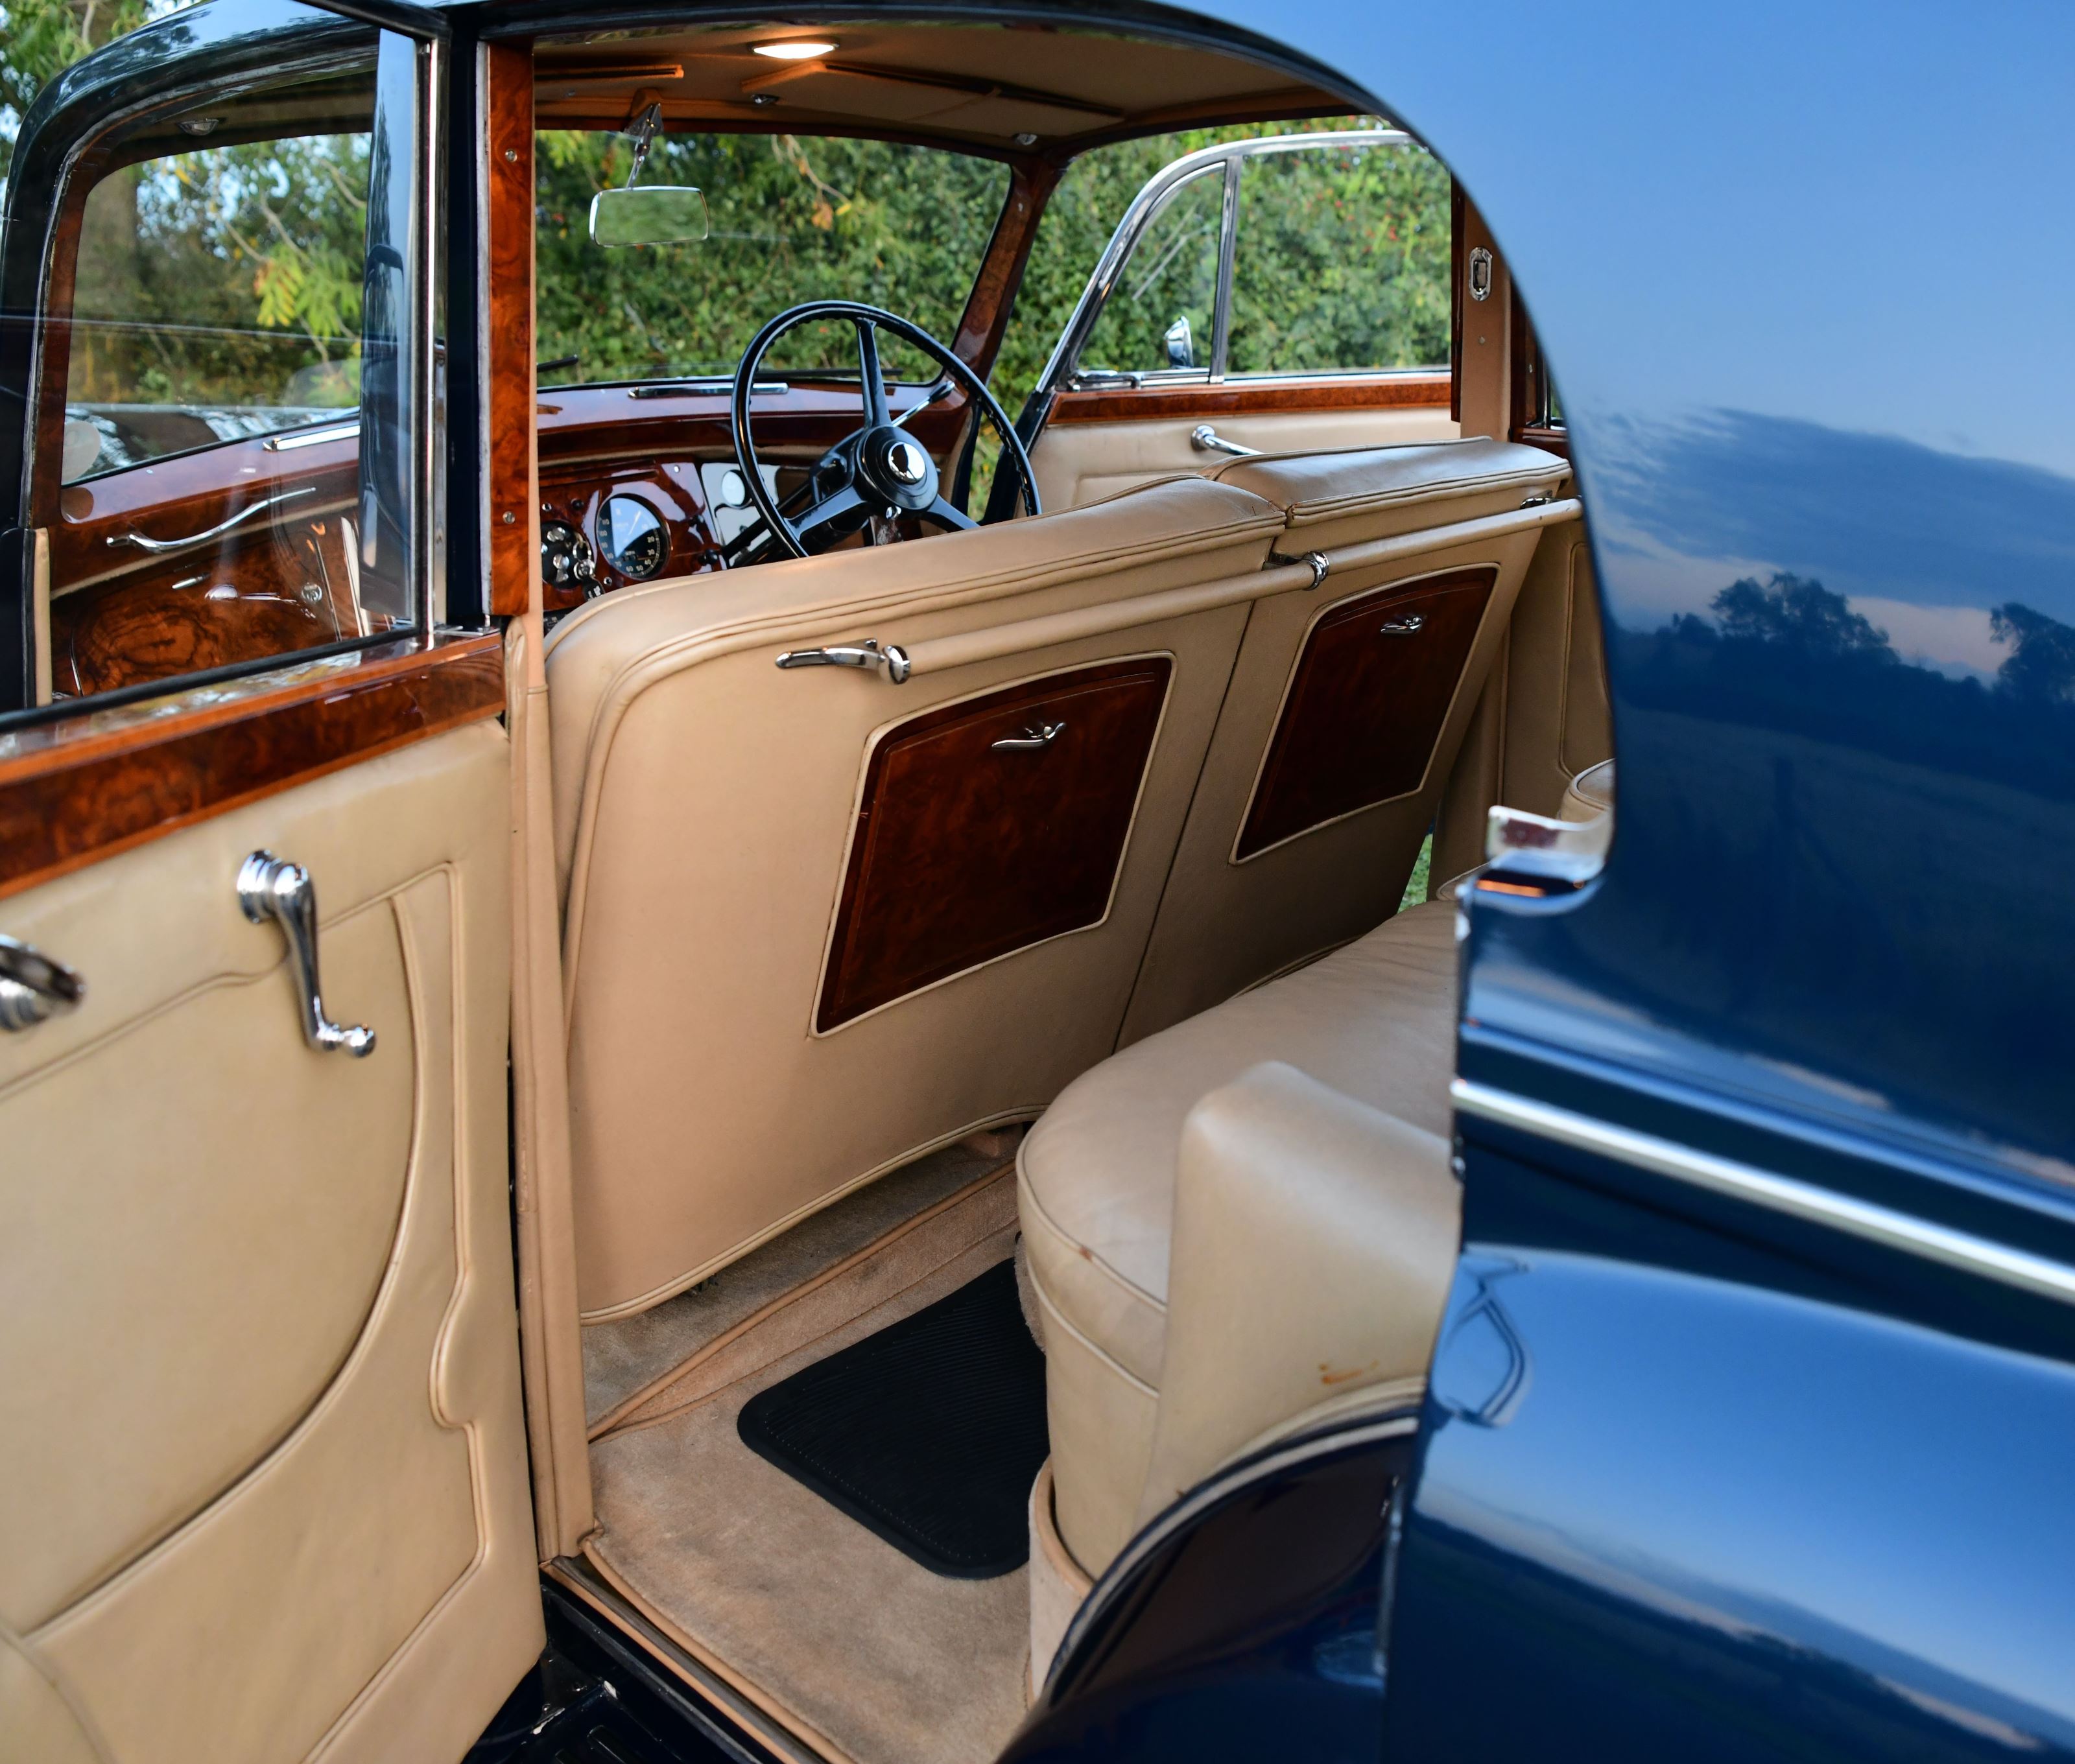 Rolls royce  silver dawn auto by james young xpb0svenf62ozd2f8dyi5